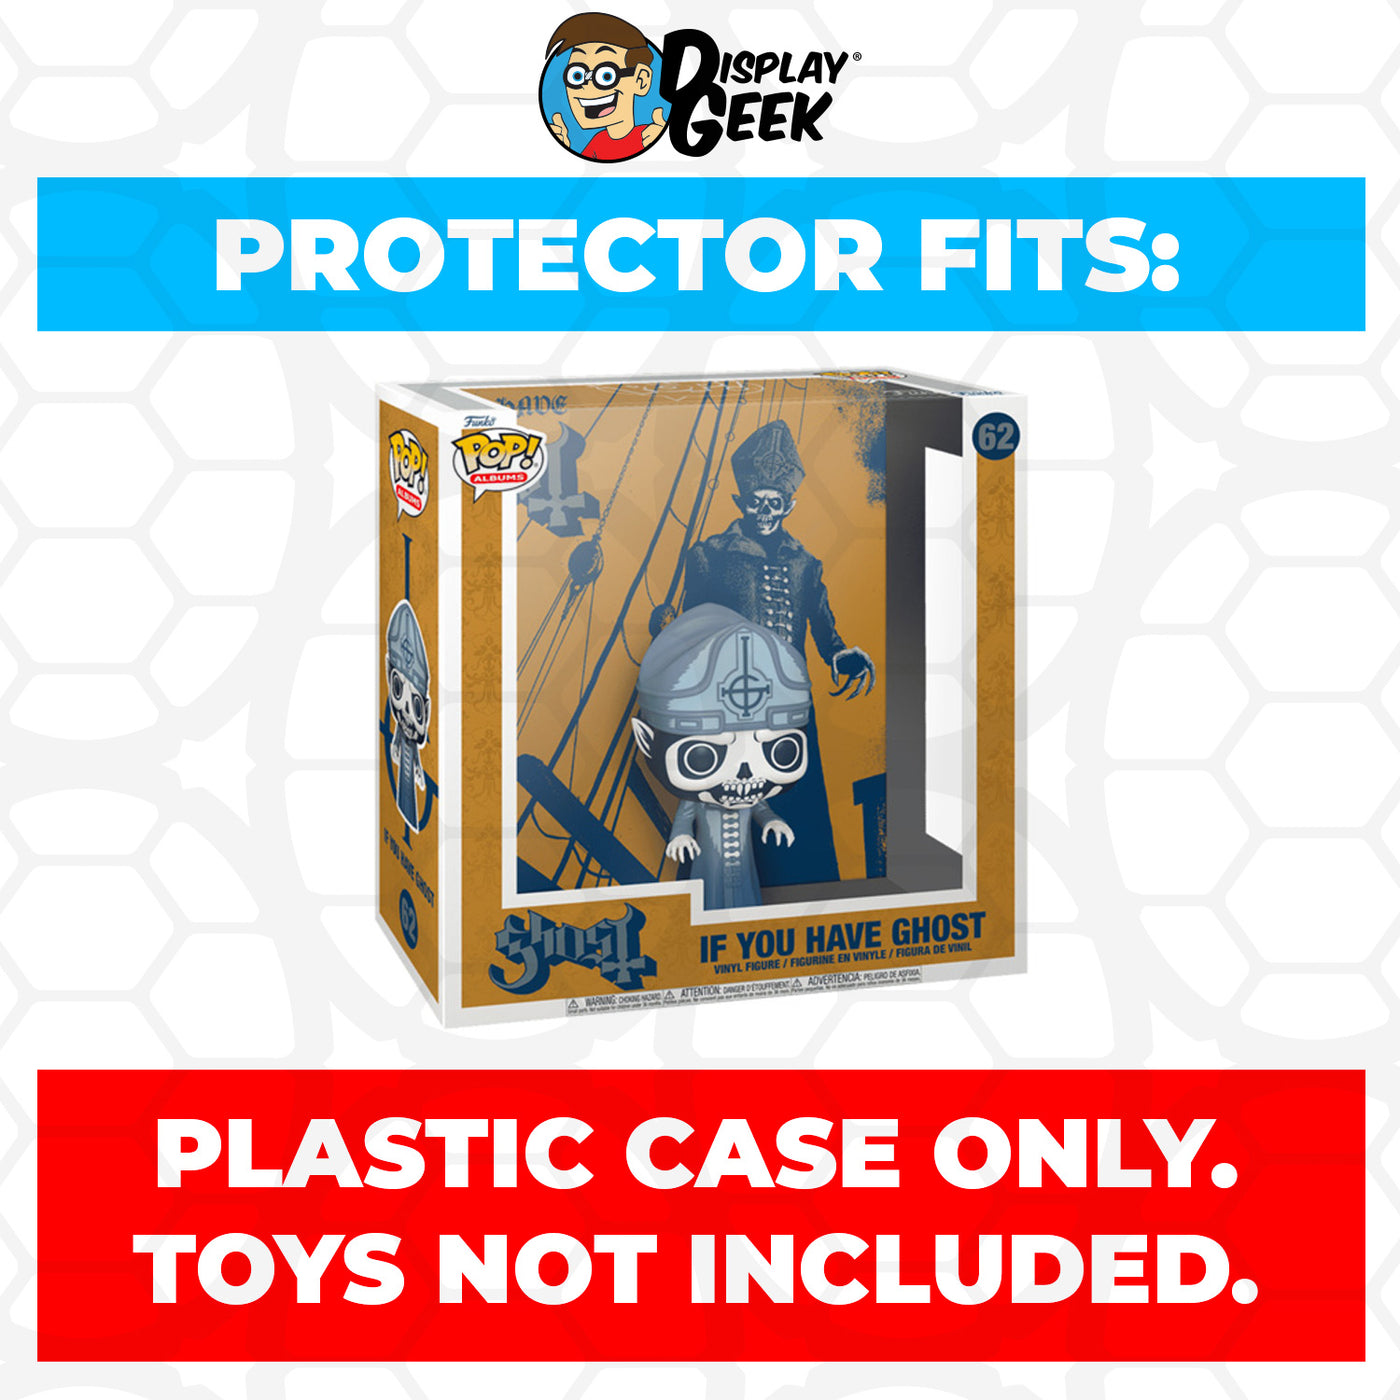 Pop Protector for Ghost If You Have Ghost #62 Funko Pop Albums on The Protector Guide App by Display Geek